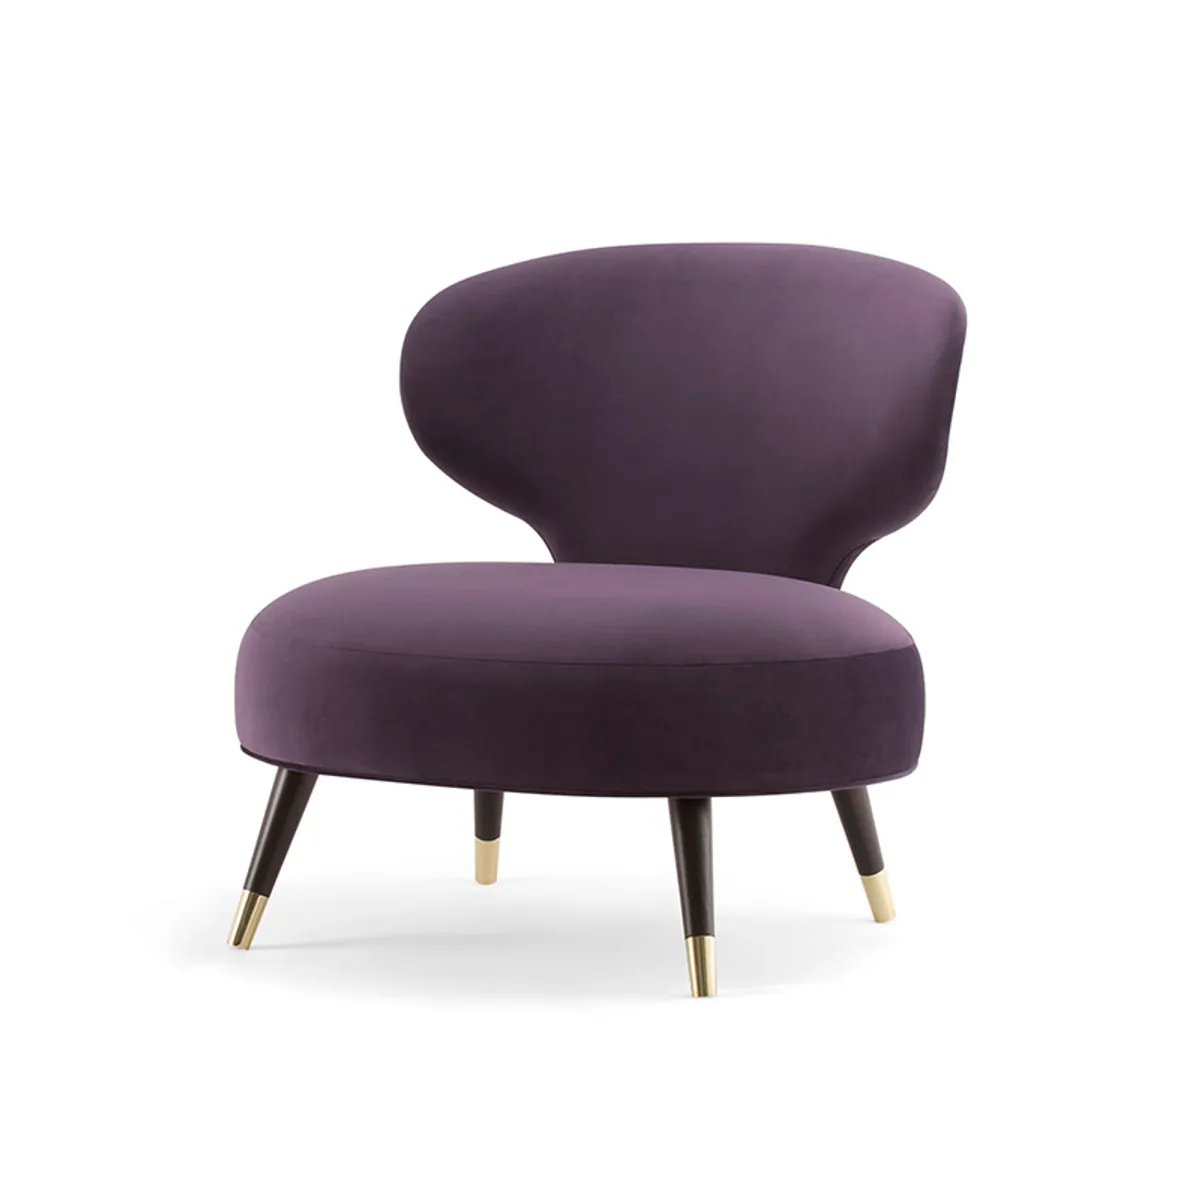 Sylvia Lounge Chair Purple Upholstery And Wooden Legs Hotel Furniture By Insideoutcontracts